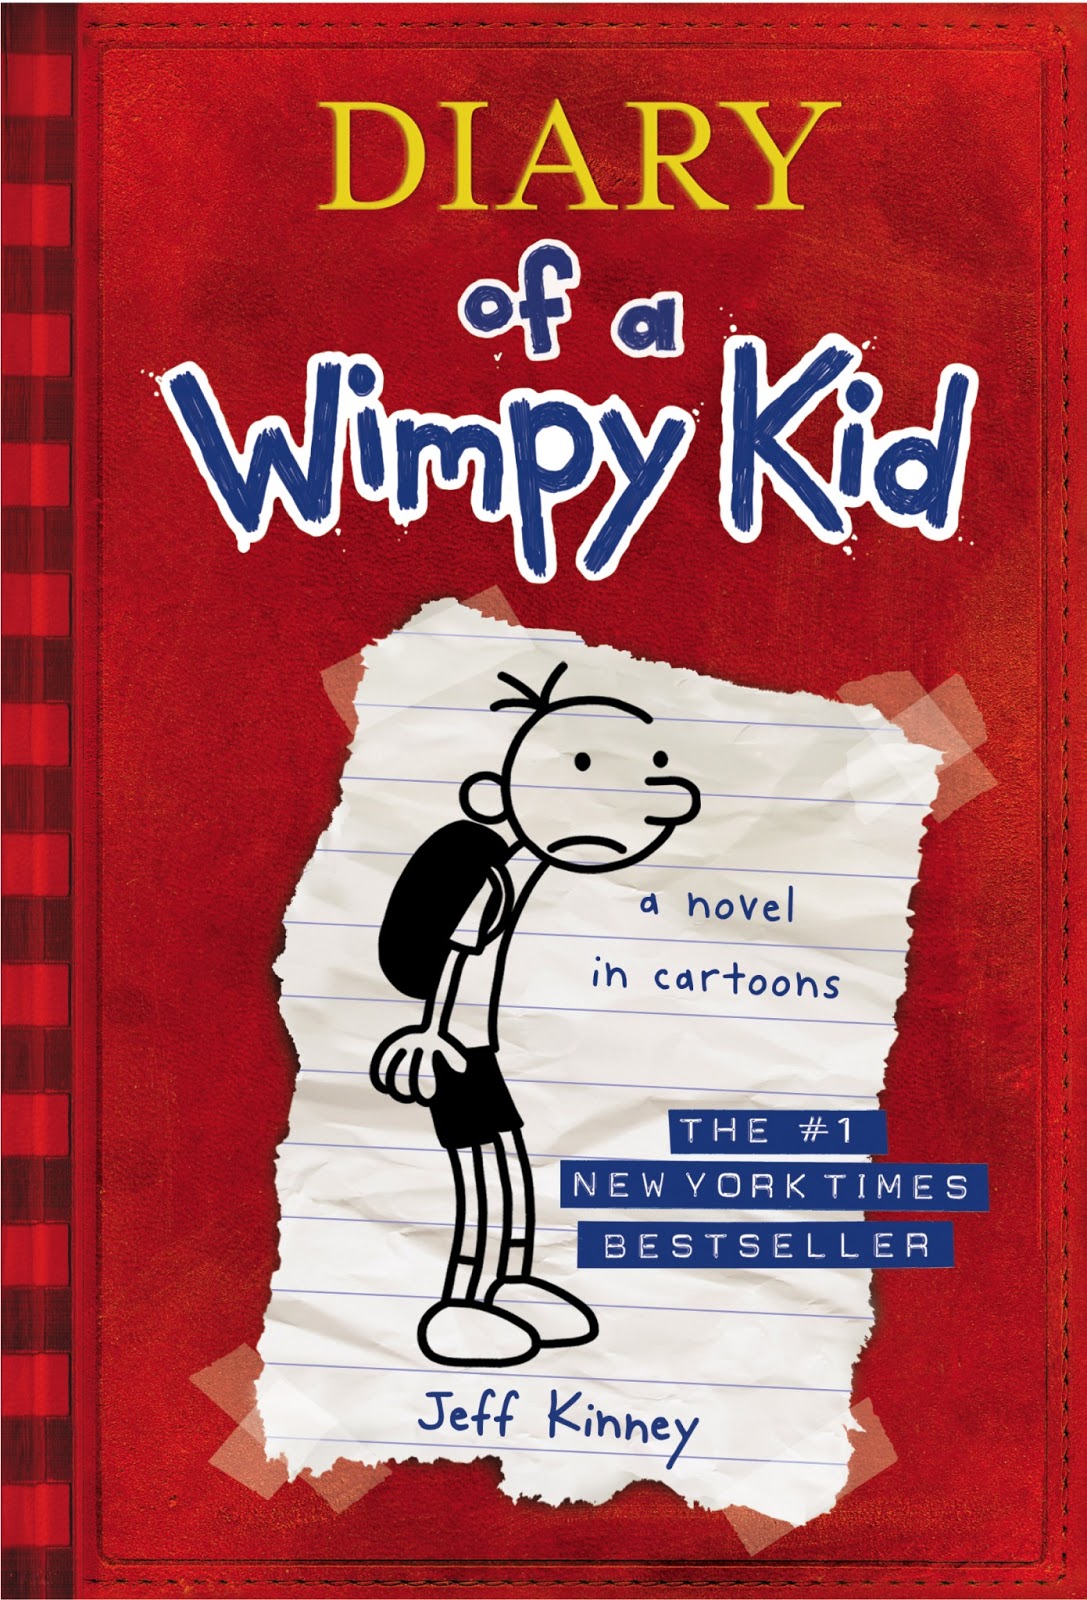 Diary of a Wimpy Kid Book 1